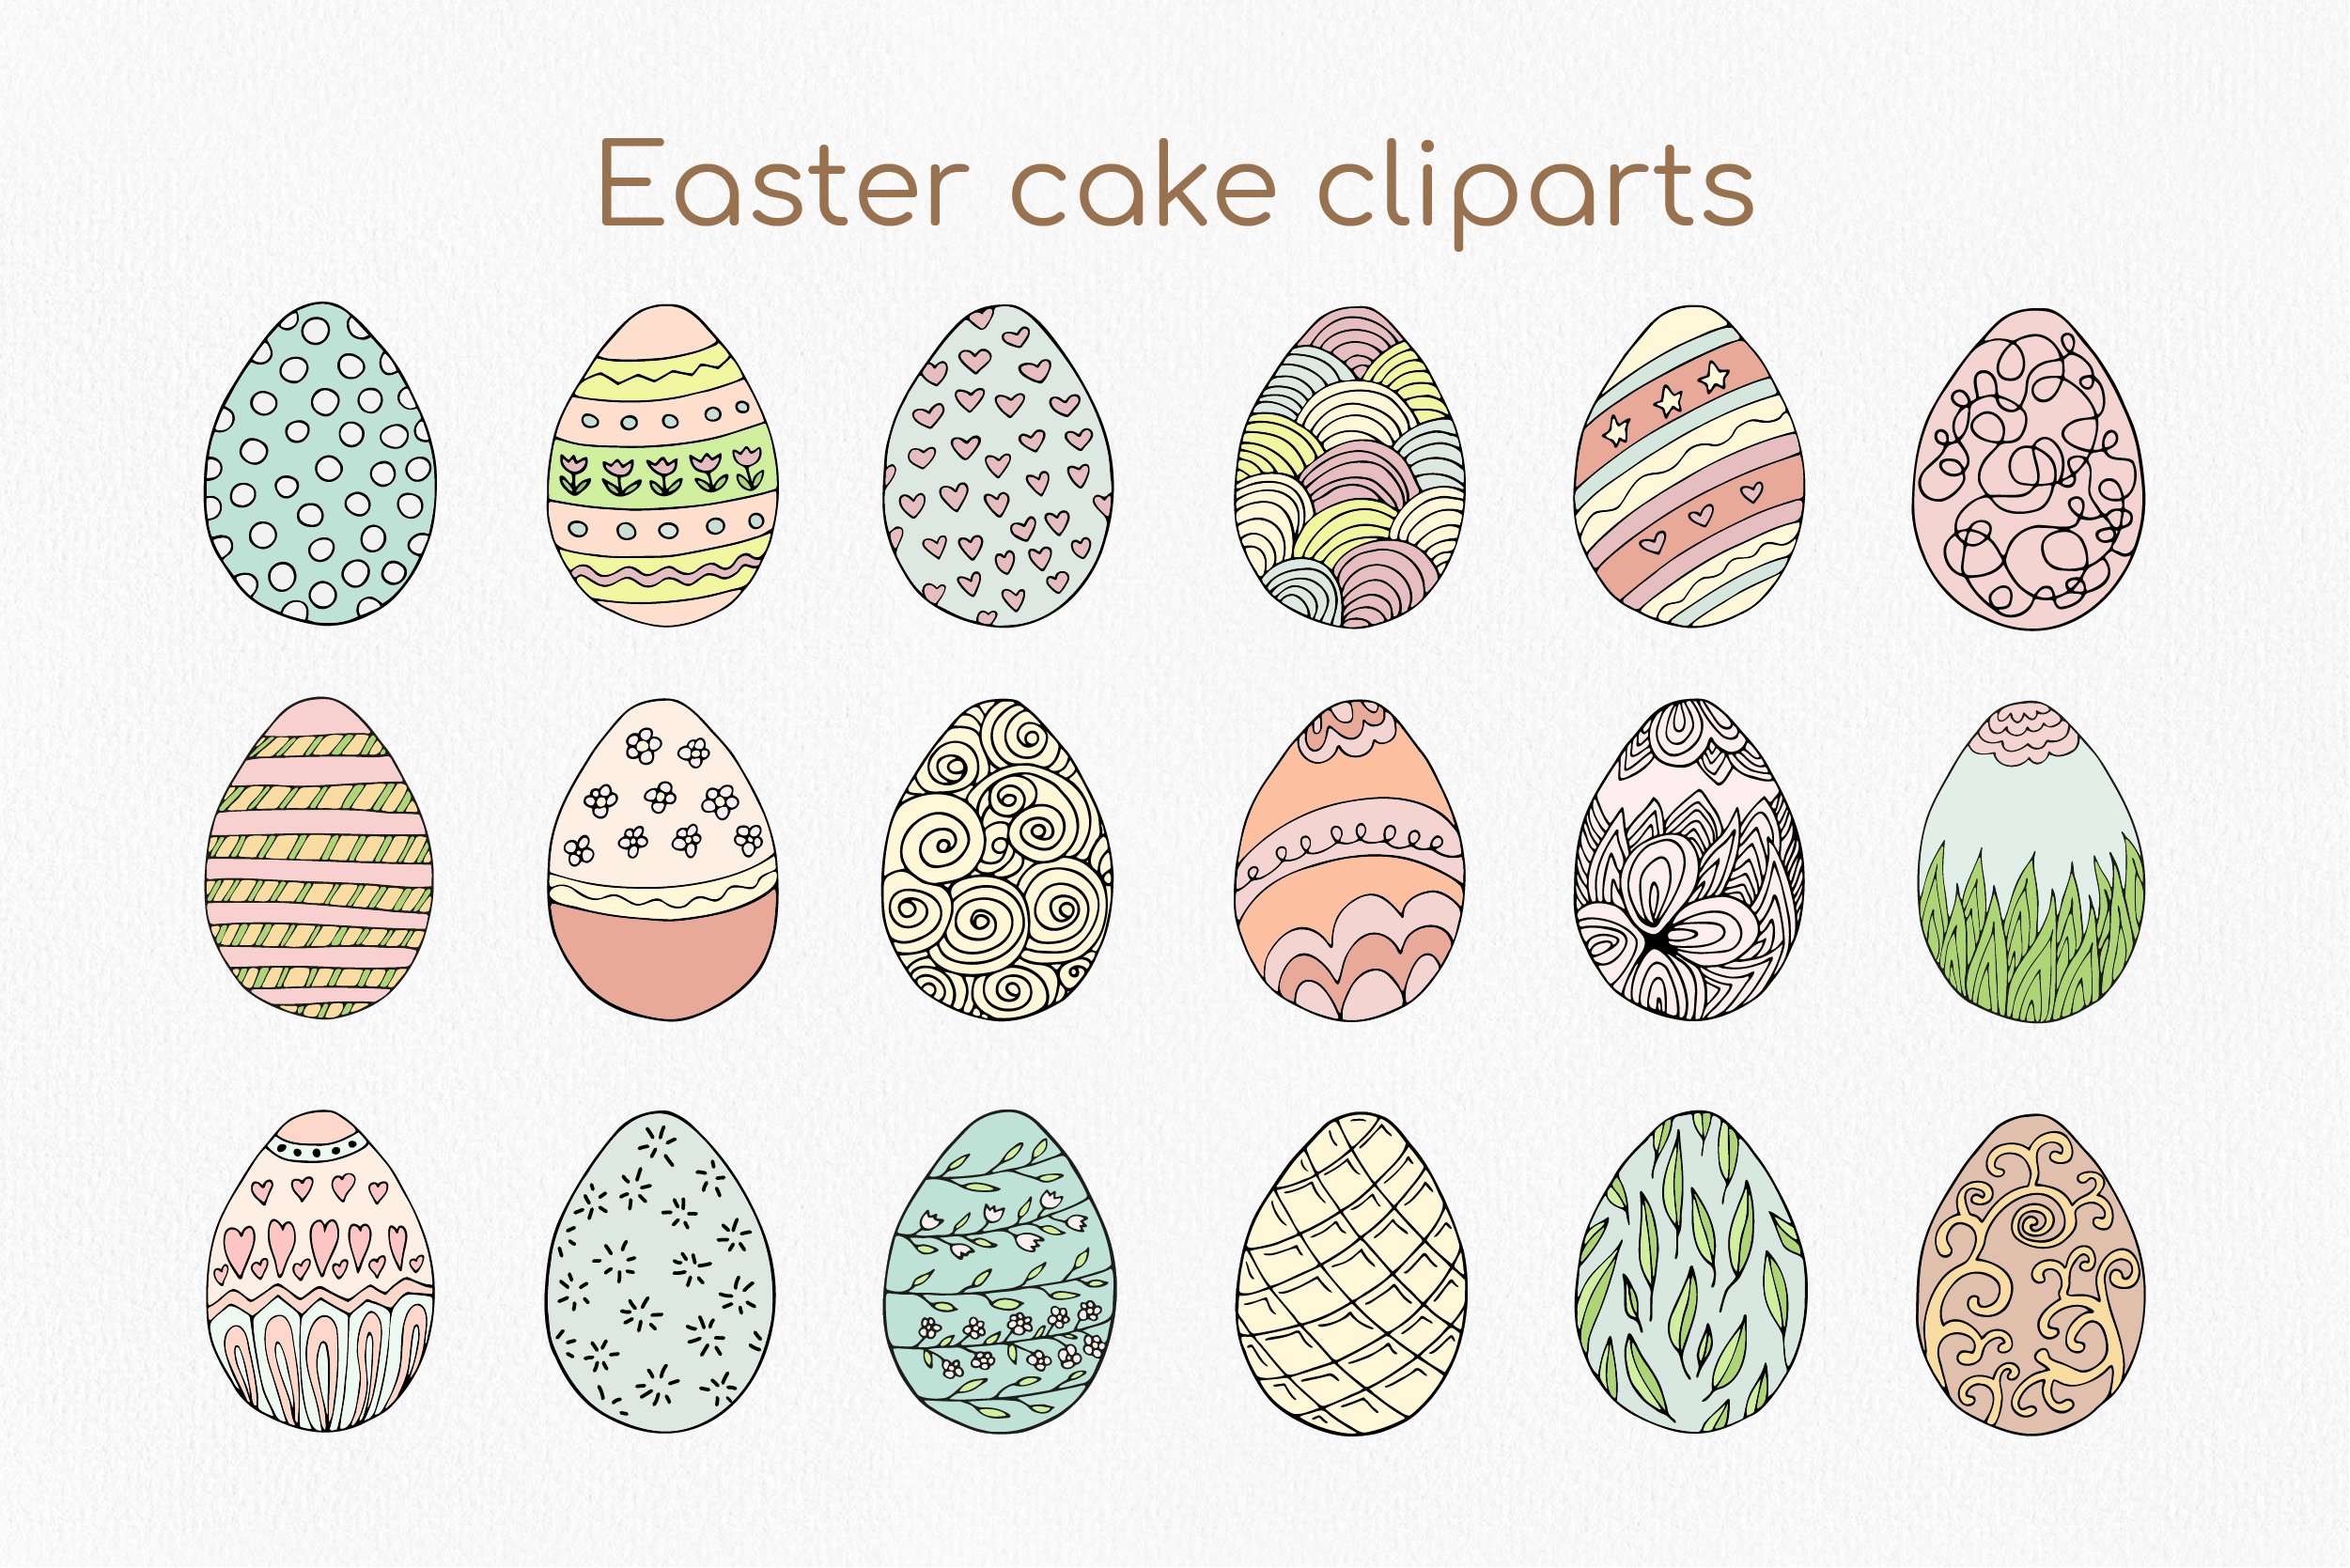 Diverse of the pastel Easter cakes.